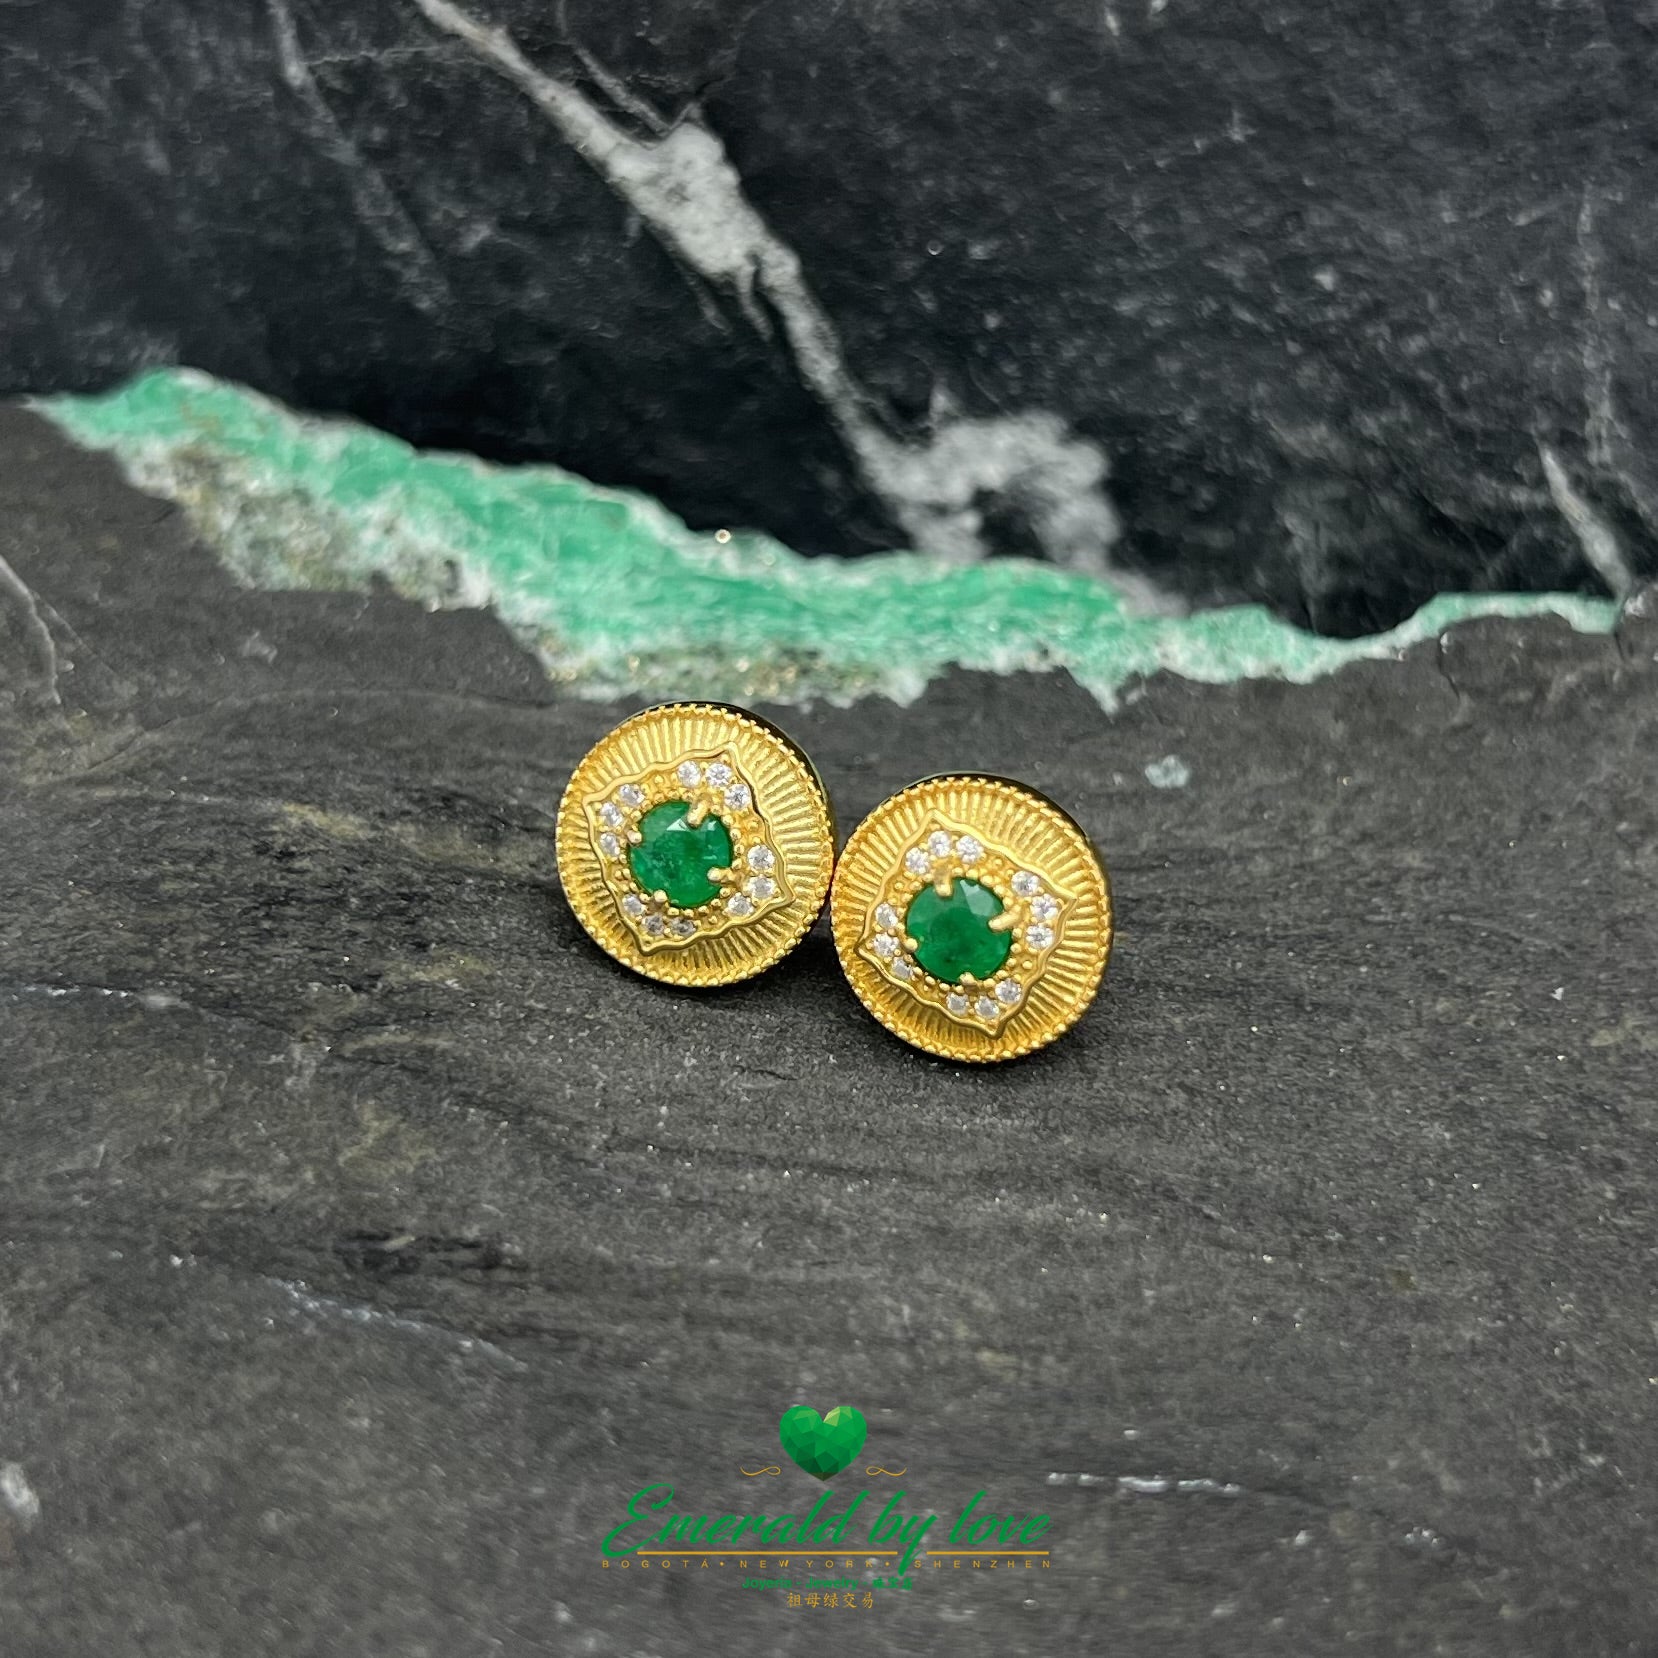 Round Sterling Silver Earrings with Gold Plating and Central Round Emerald